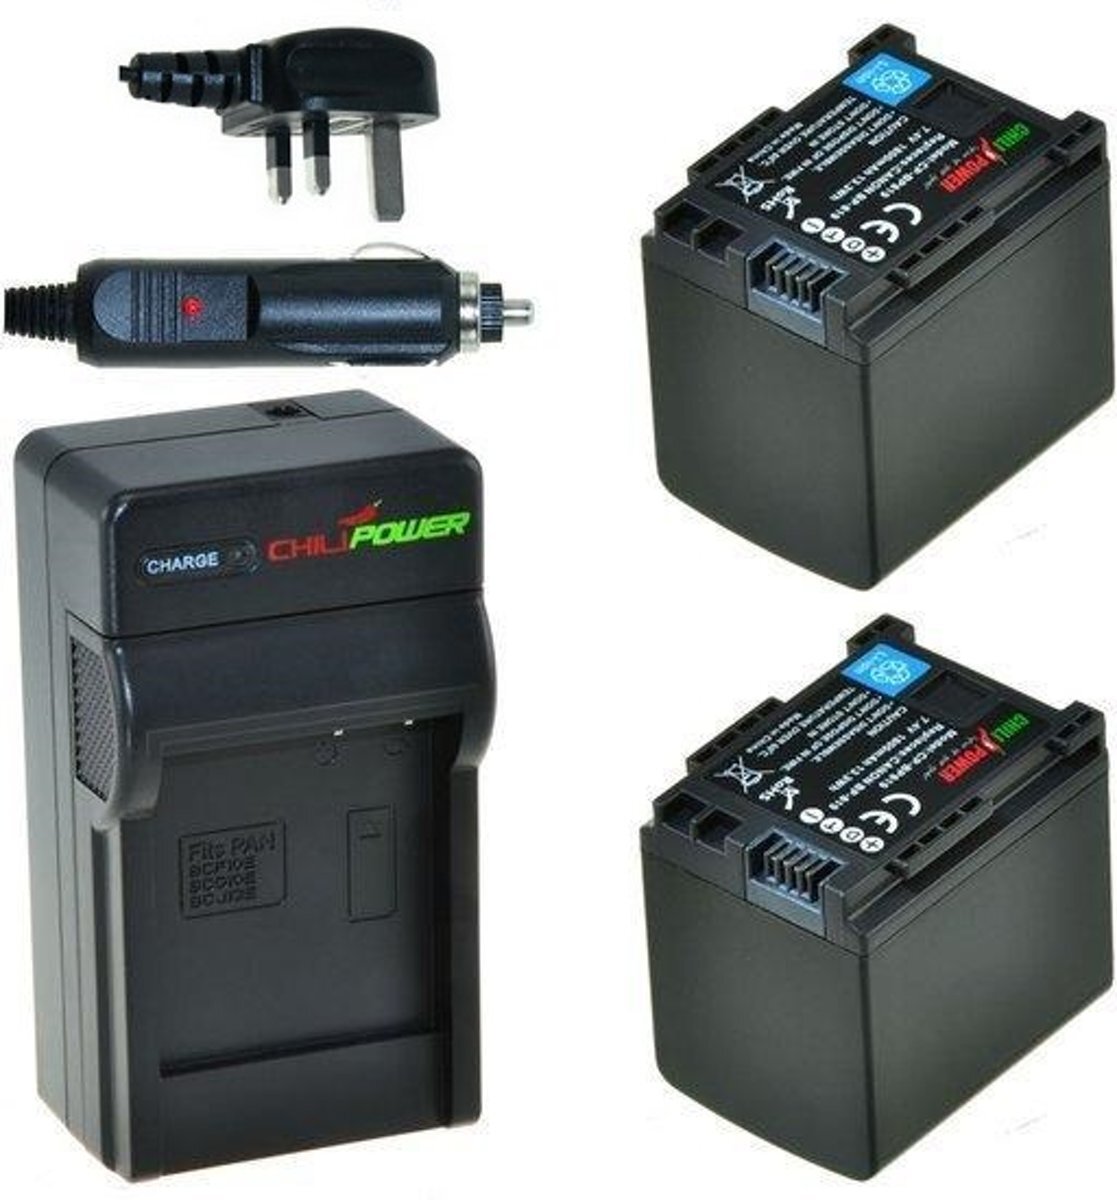 ChiliPower 2 x BP-819 accu's voor Canon - Charger Kit + car-charger - UK version 2 x BP-819 accu's voor Canon - Charger Kit + car-charger - UK version